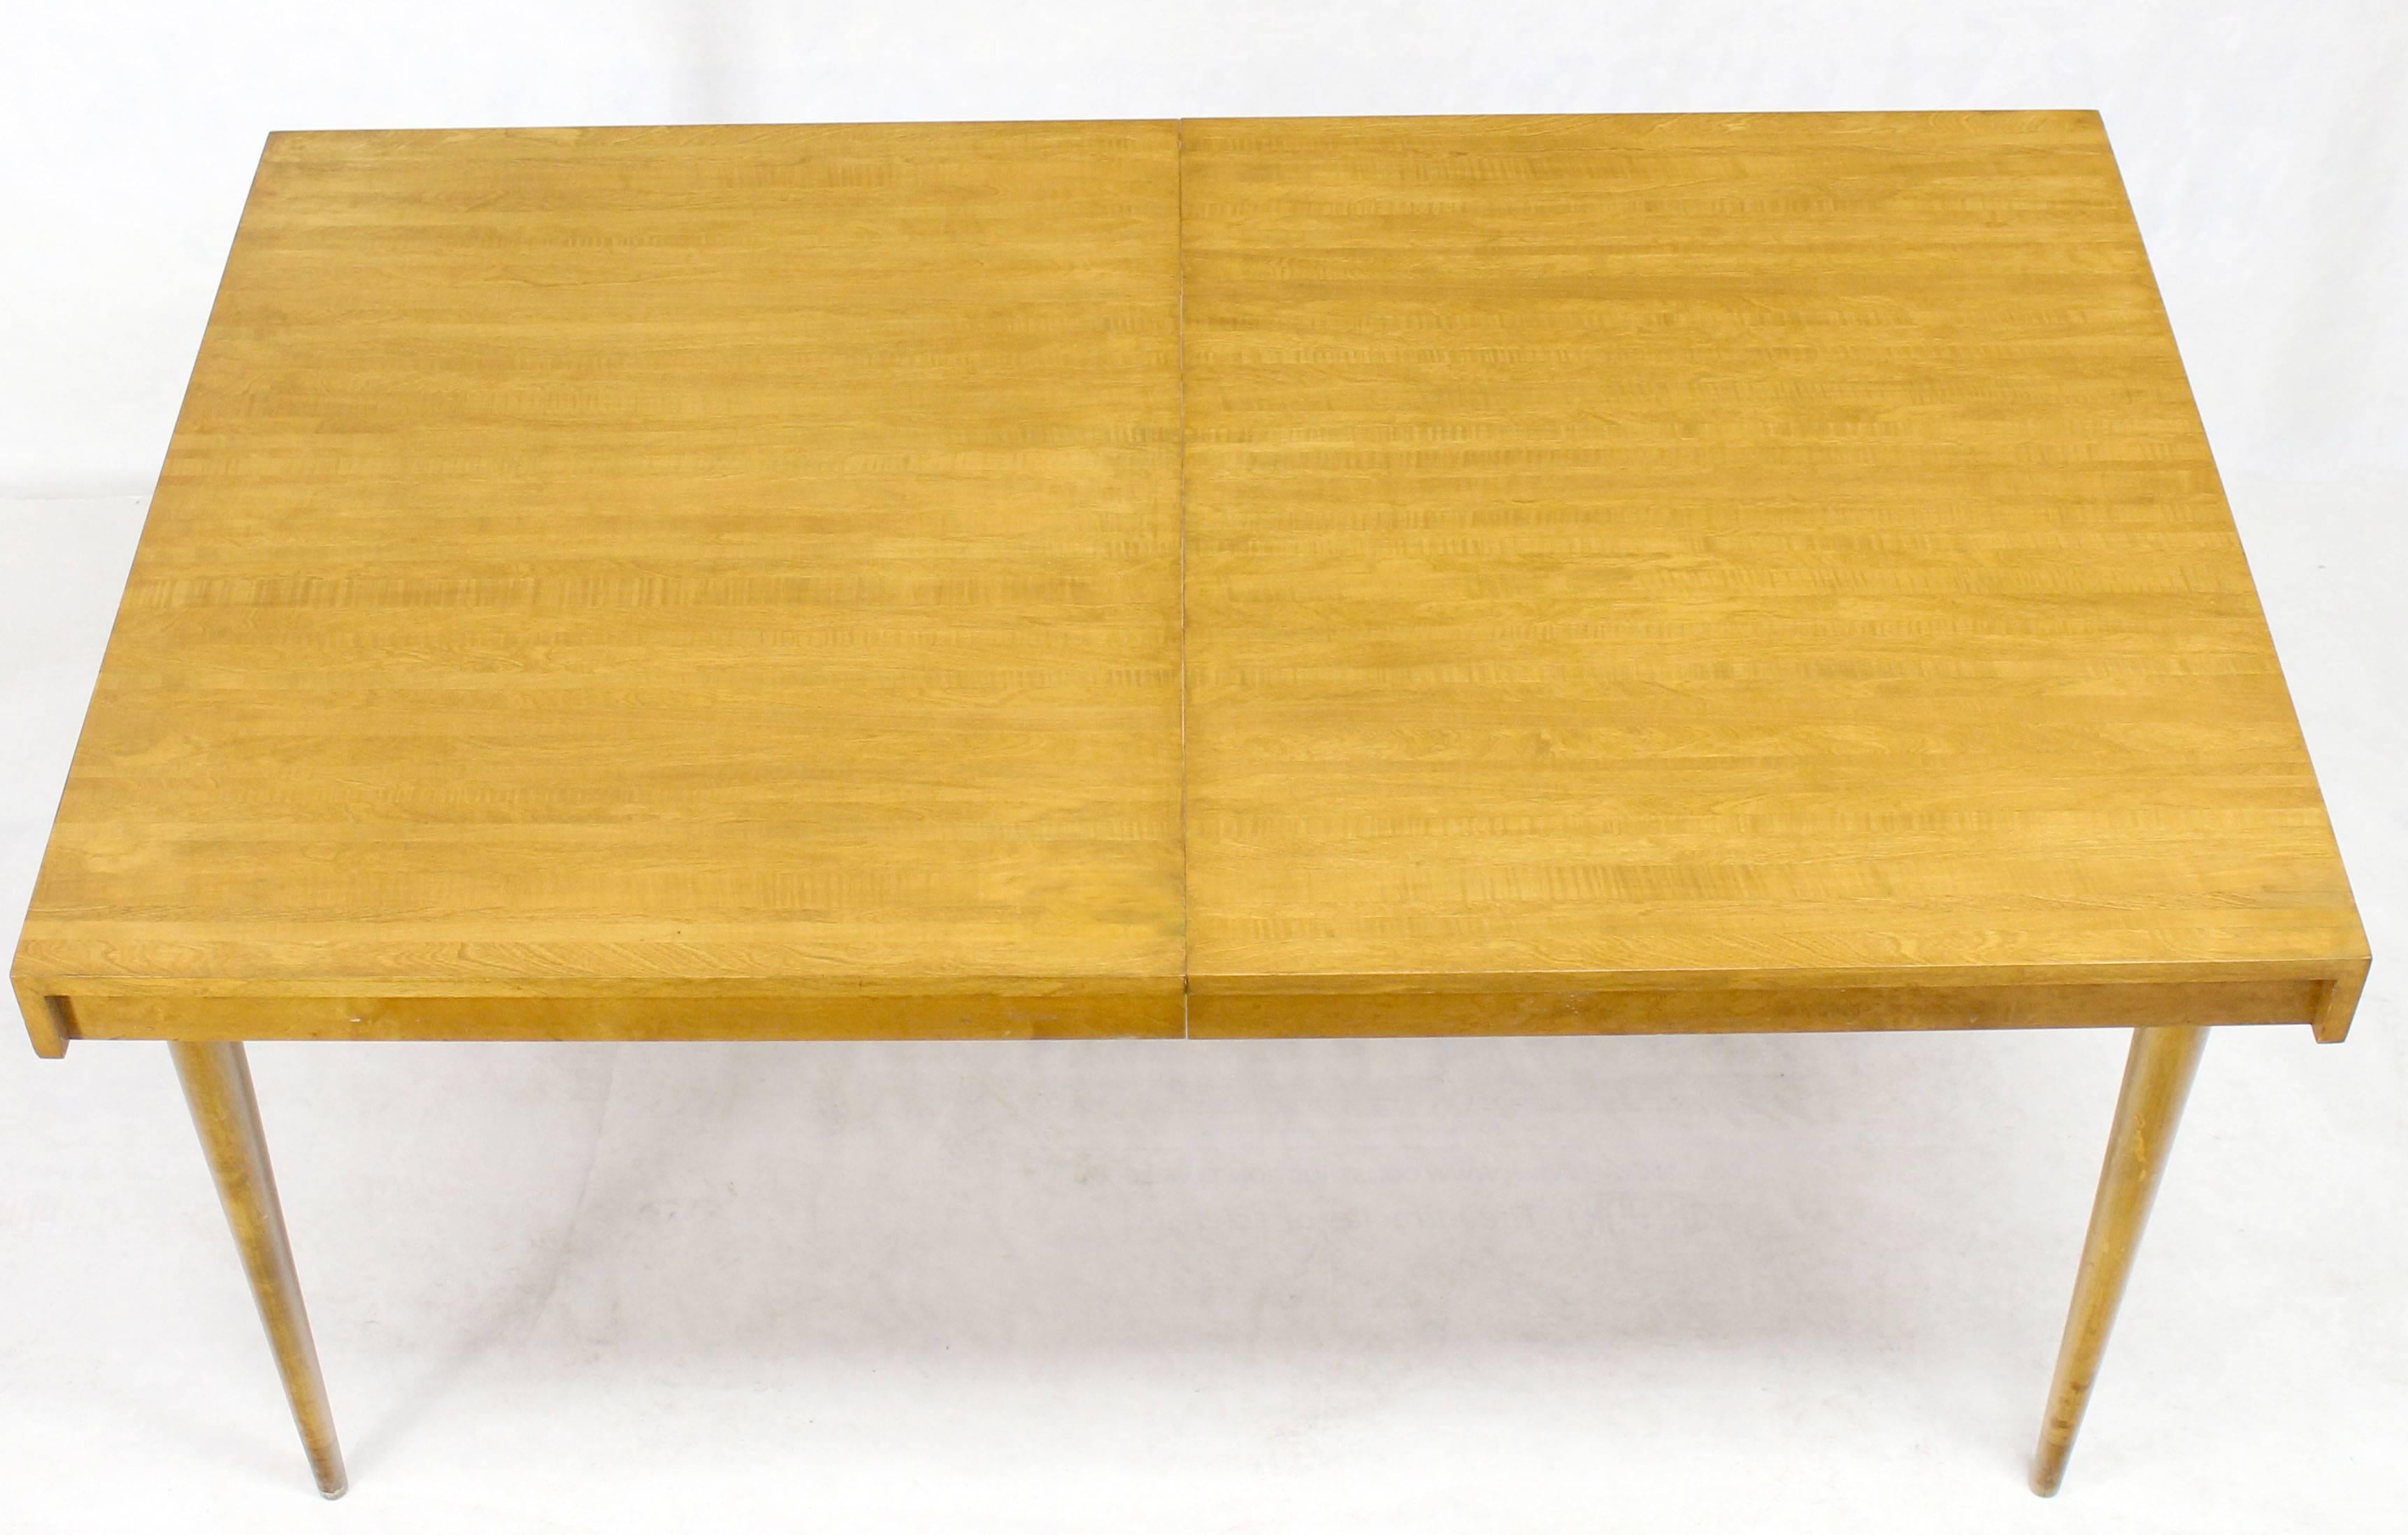 Lacquered Swedish Blond Birch Dining Table w/ Two Extension Boards Leafs  For Sale